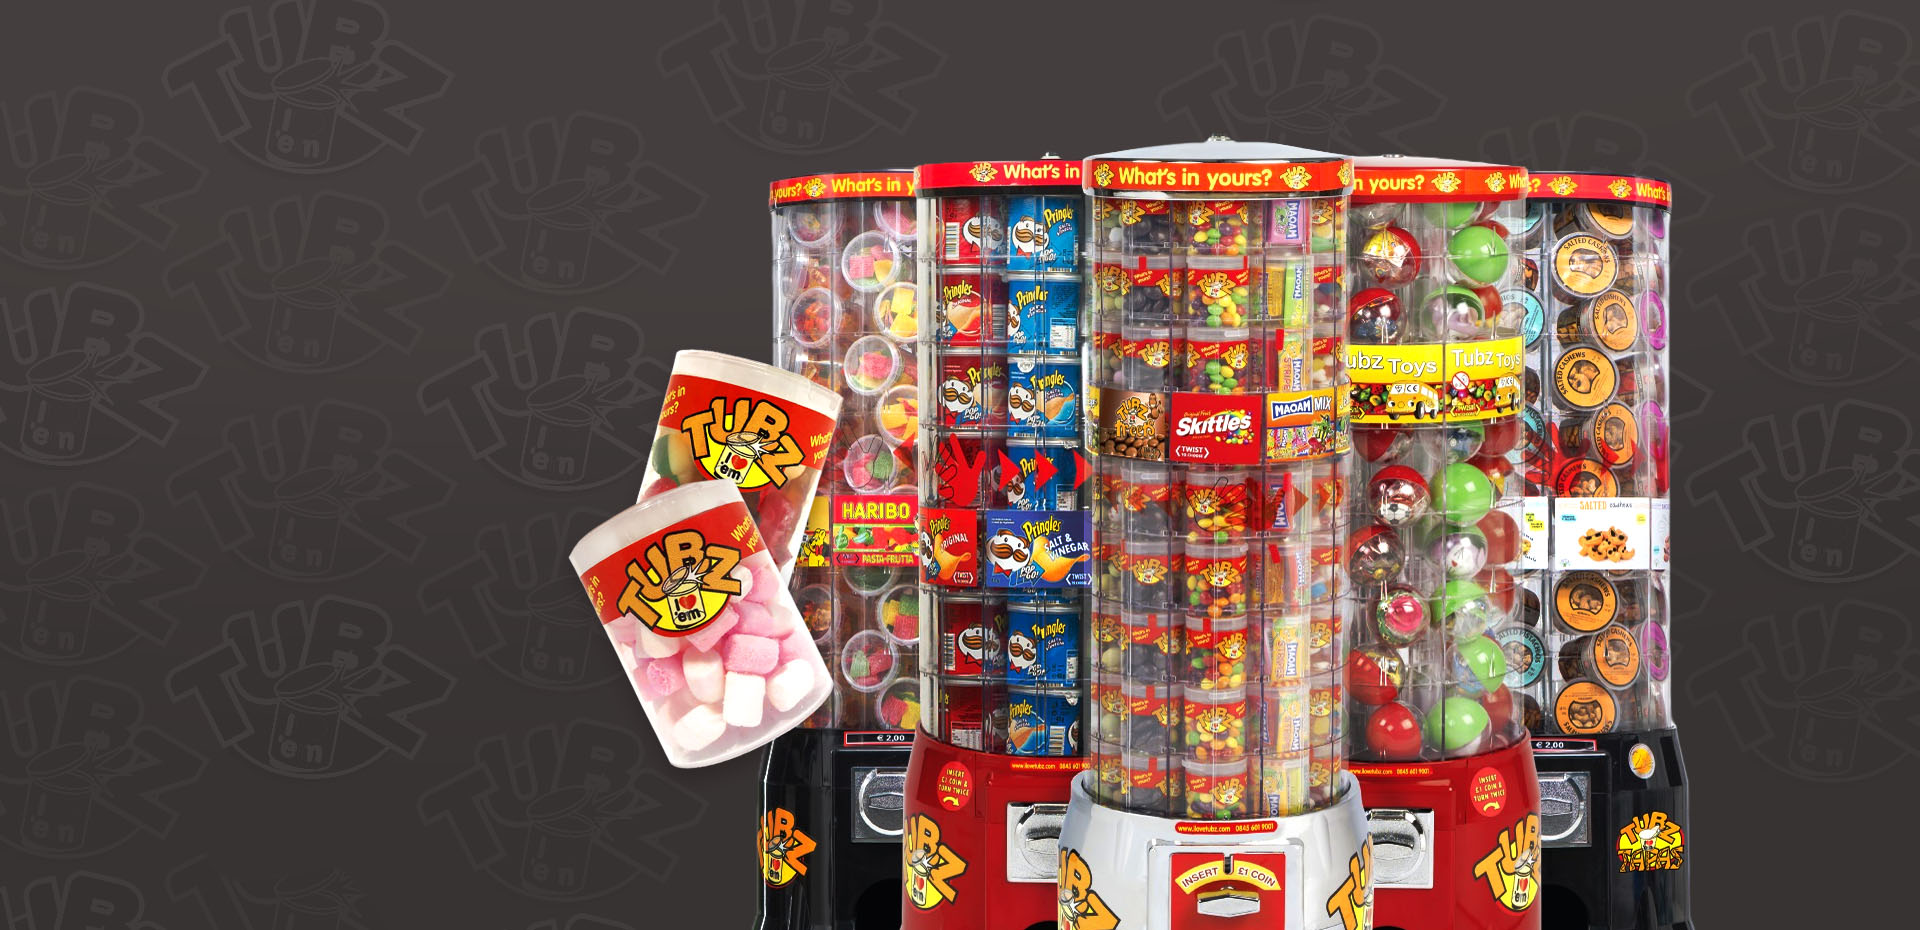 Installers Of Sweets Vending Machines For Soft Play Establishments East Midlands